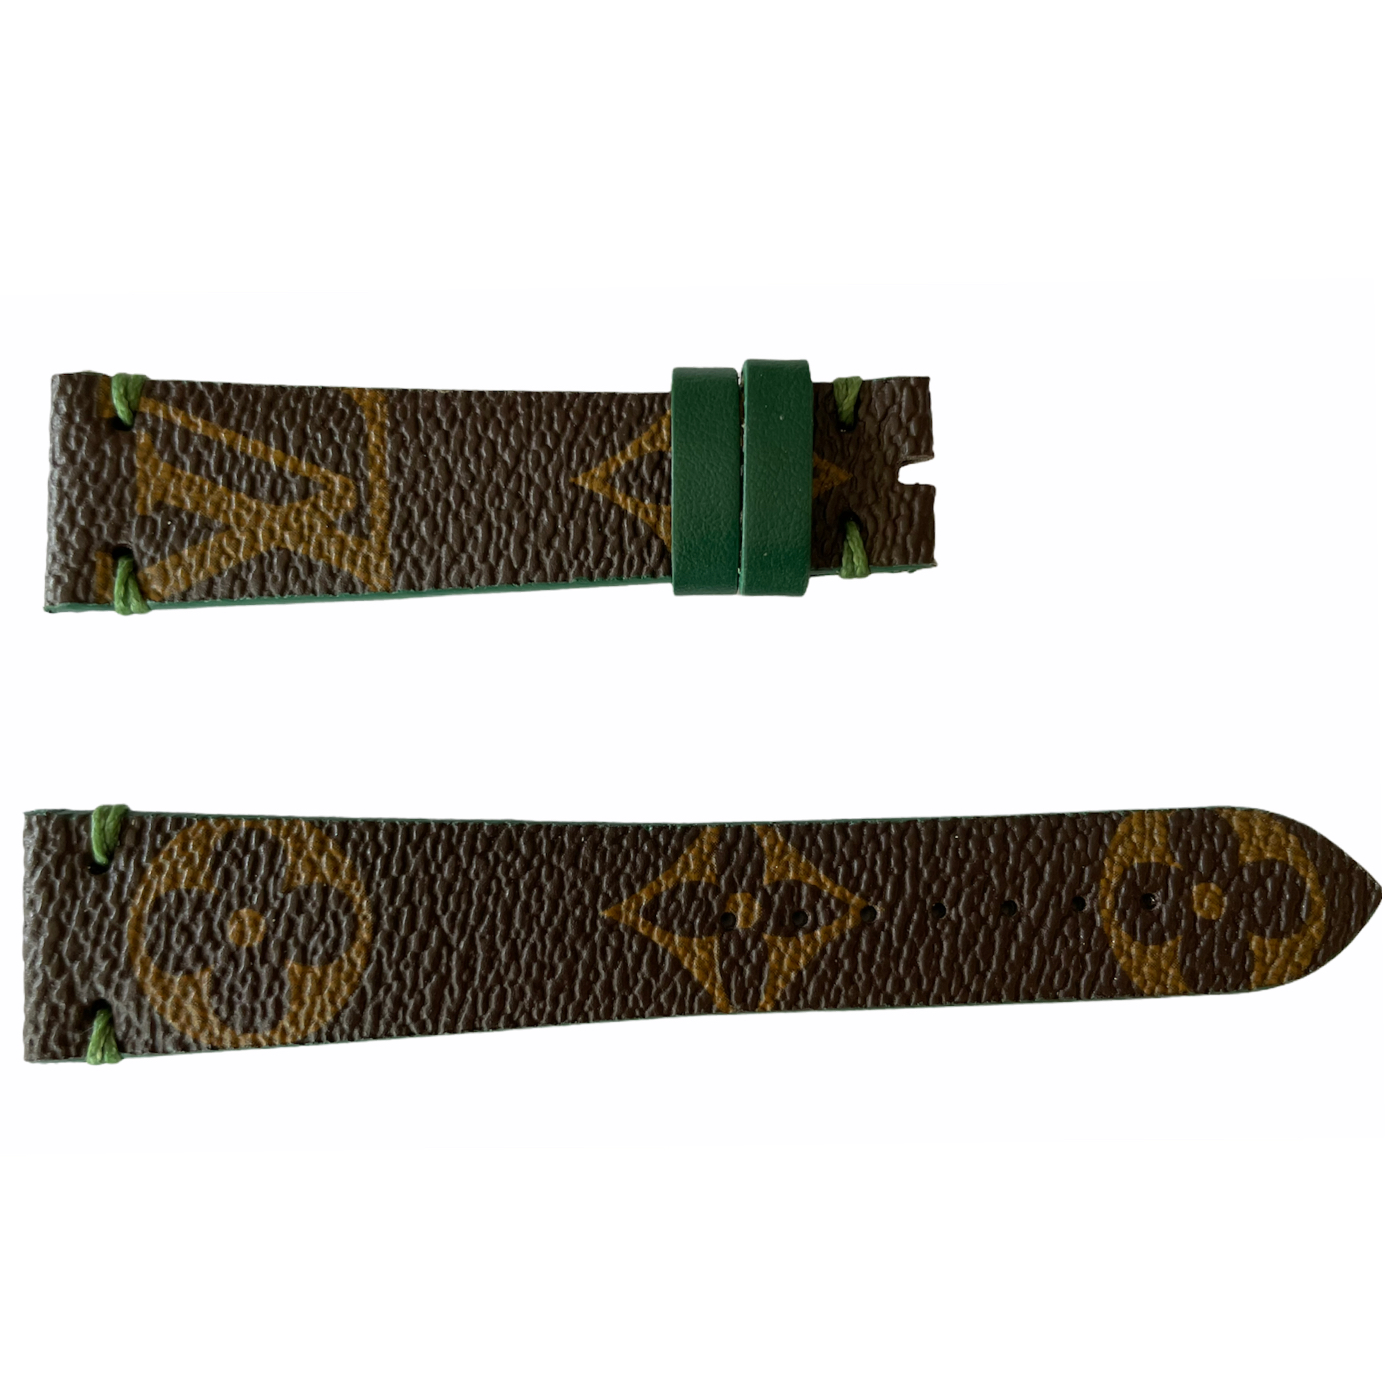 Louis Vuitton monogram leather strap for watches brown & green